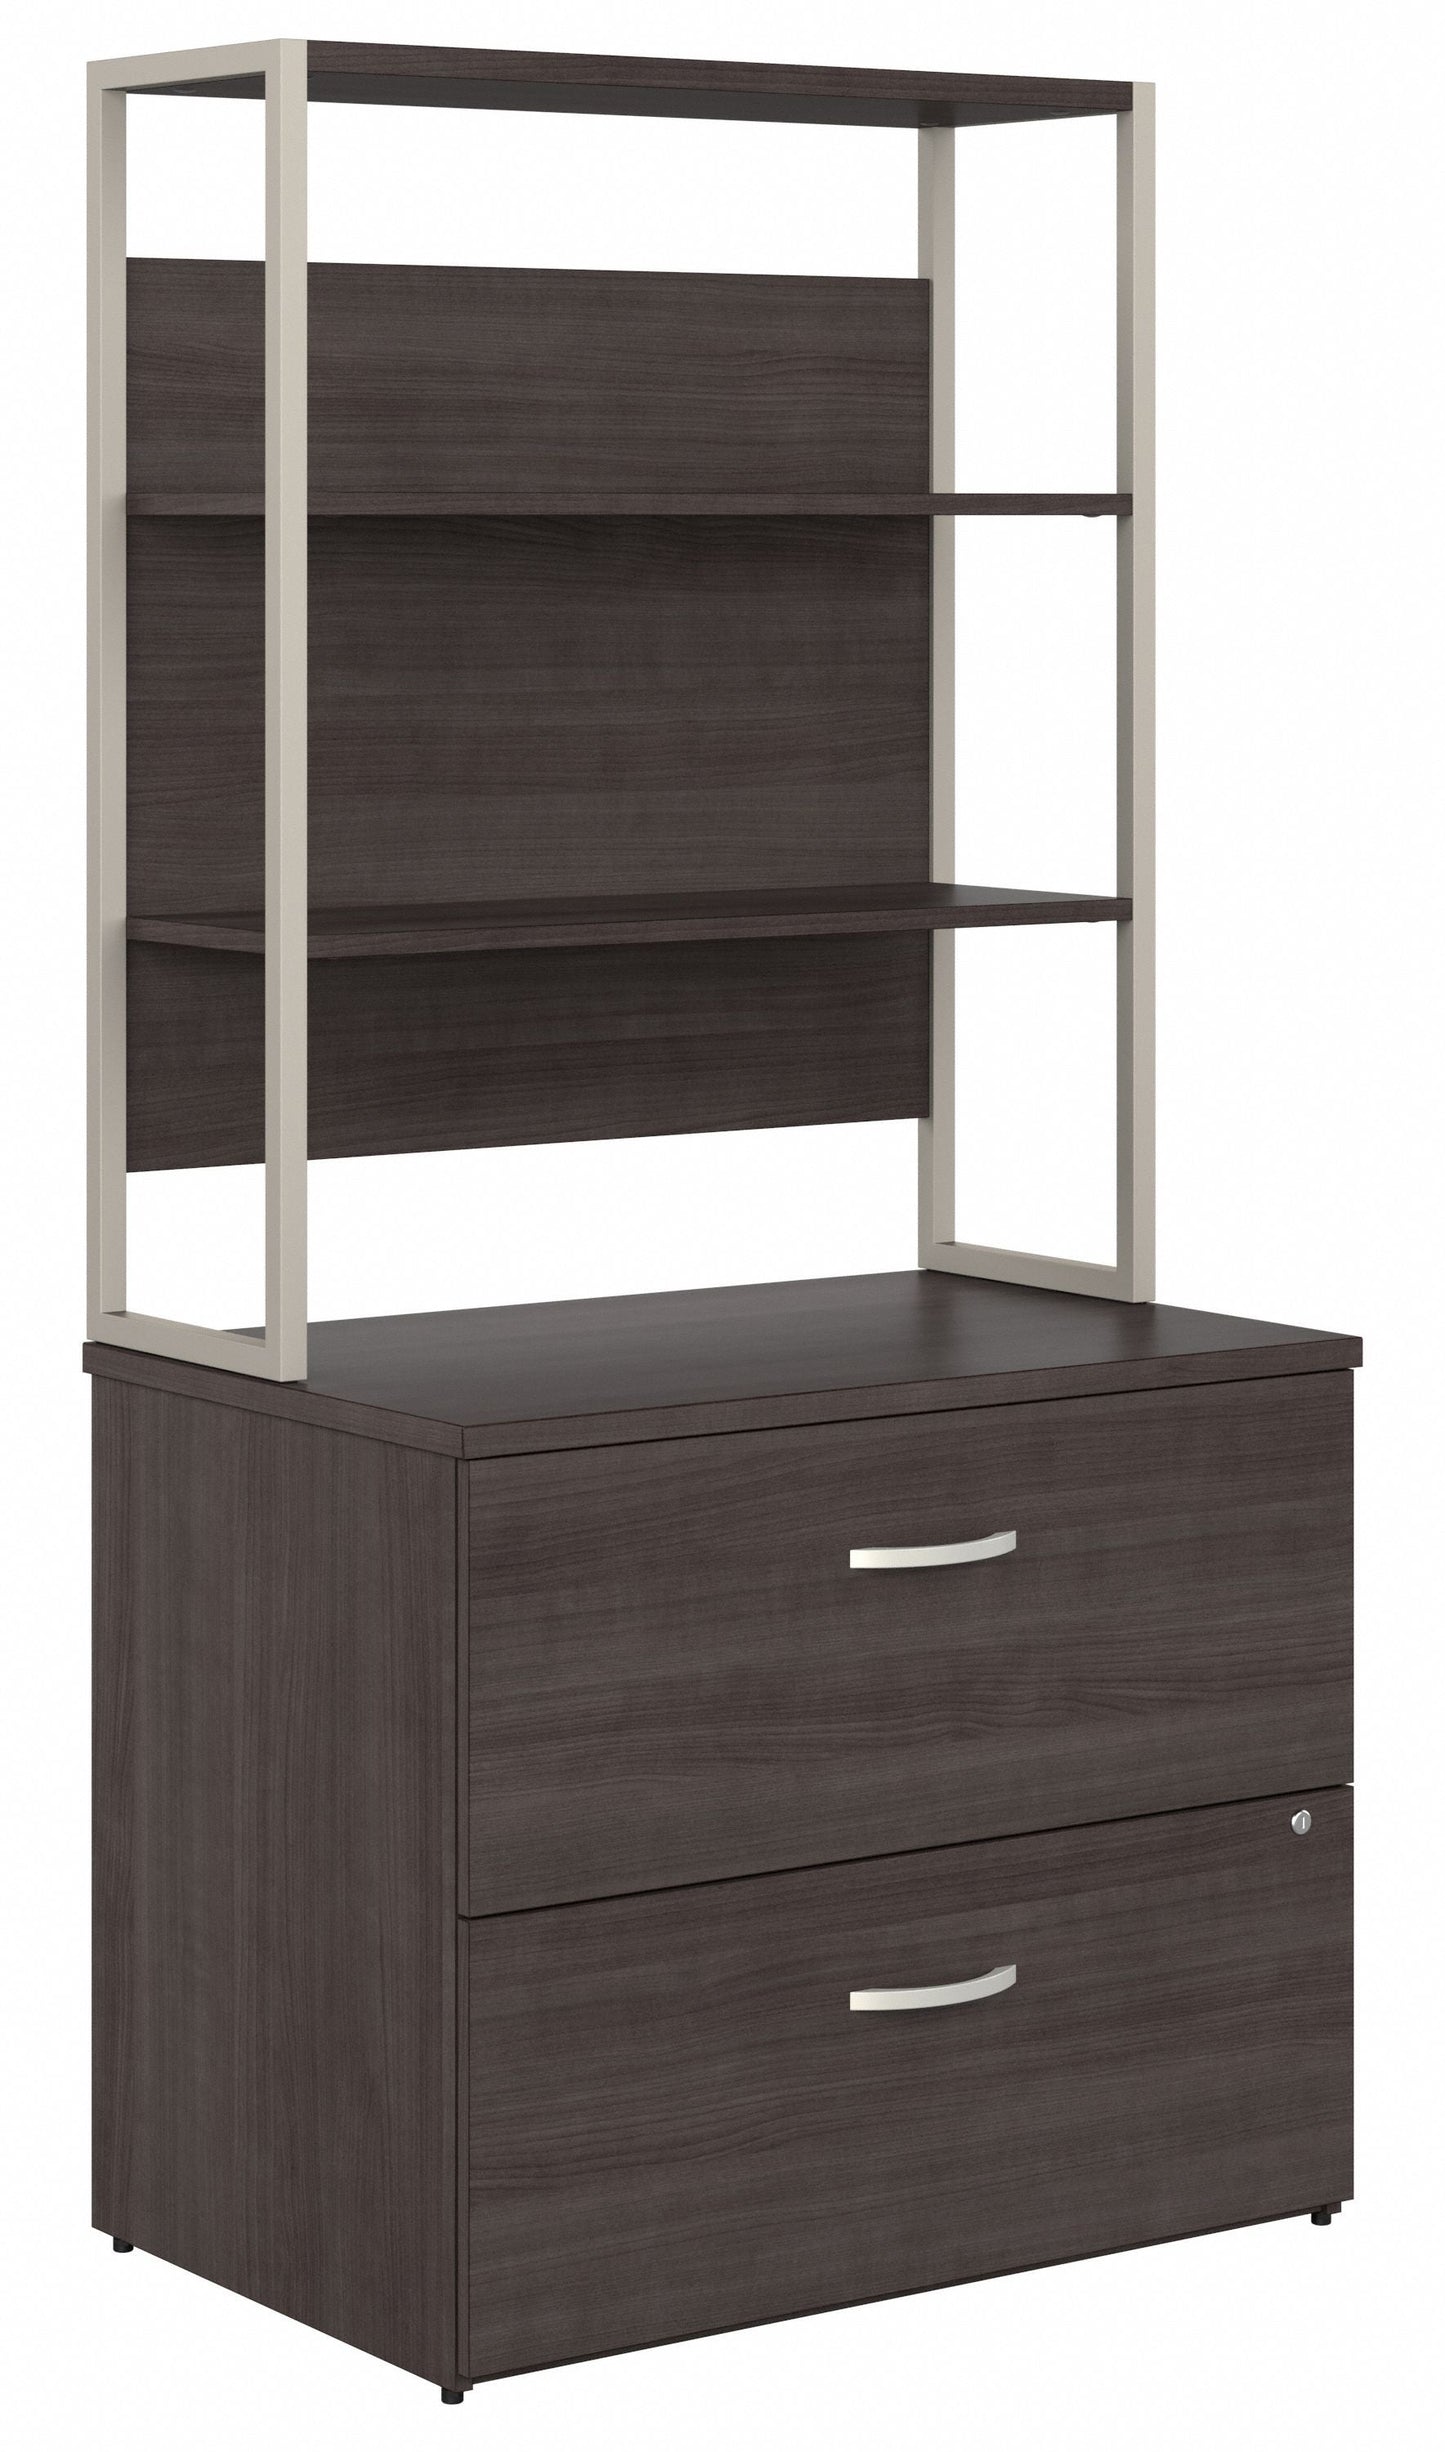 Bush Business Furniture Hybrid 2 Drawer Lateral File Cabinet with Shelves in Storm Gray